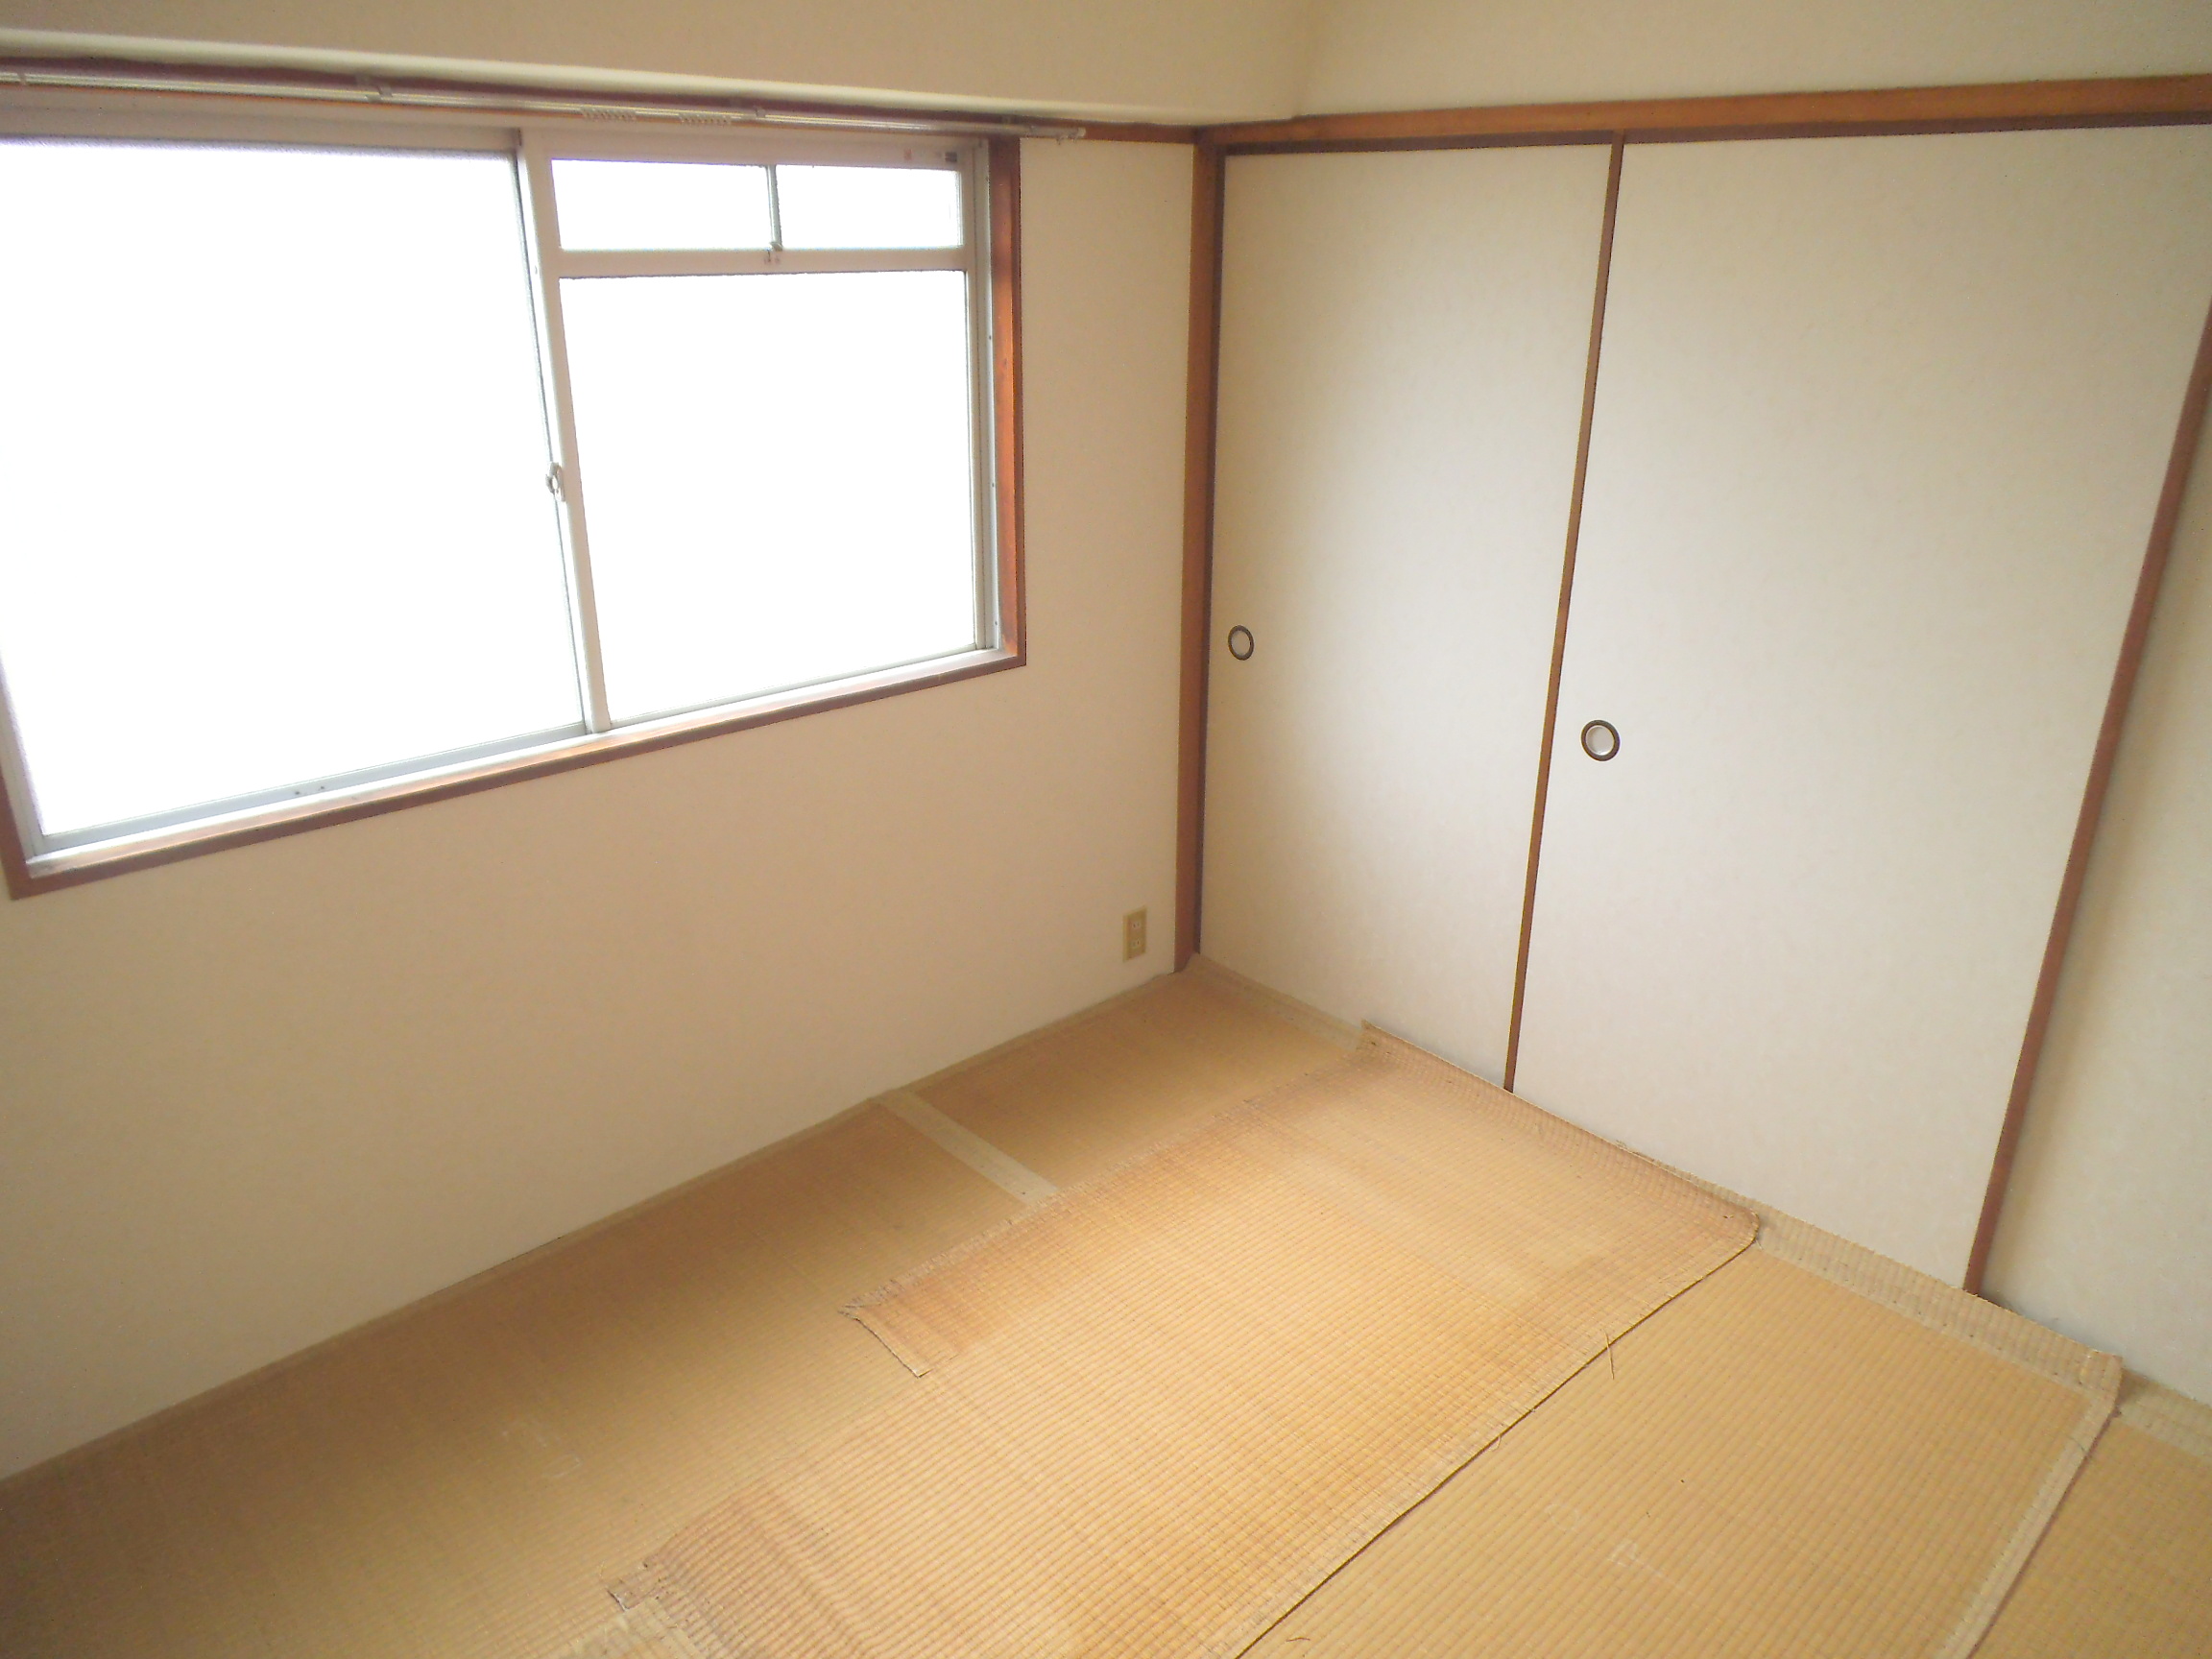 Other room space. Because the corner room is a bright room with many windows